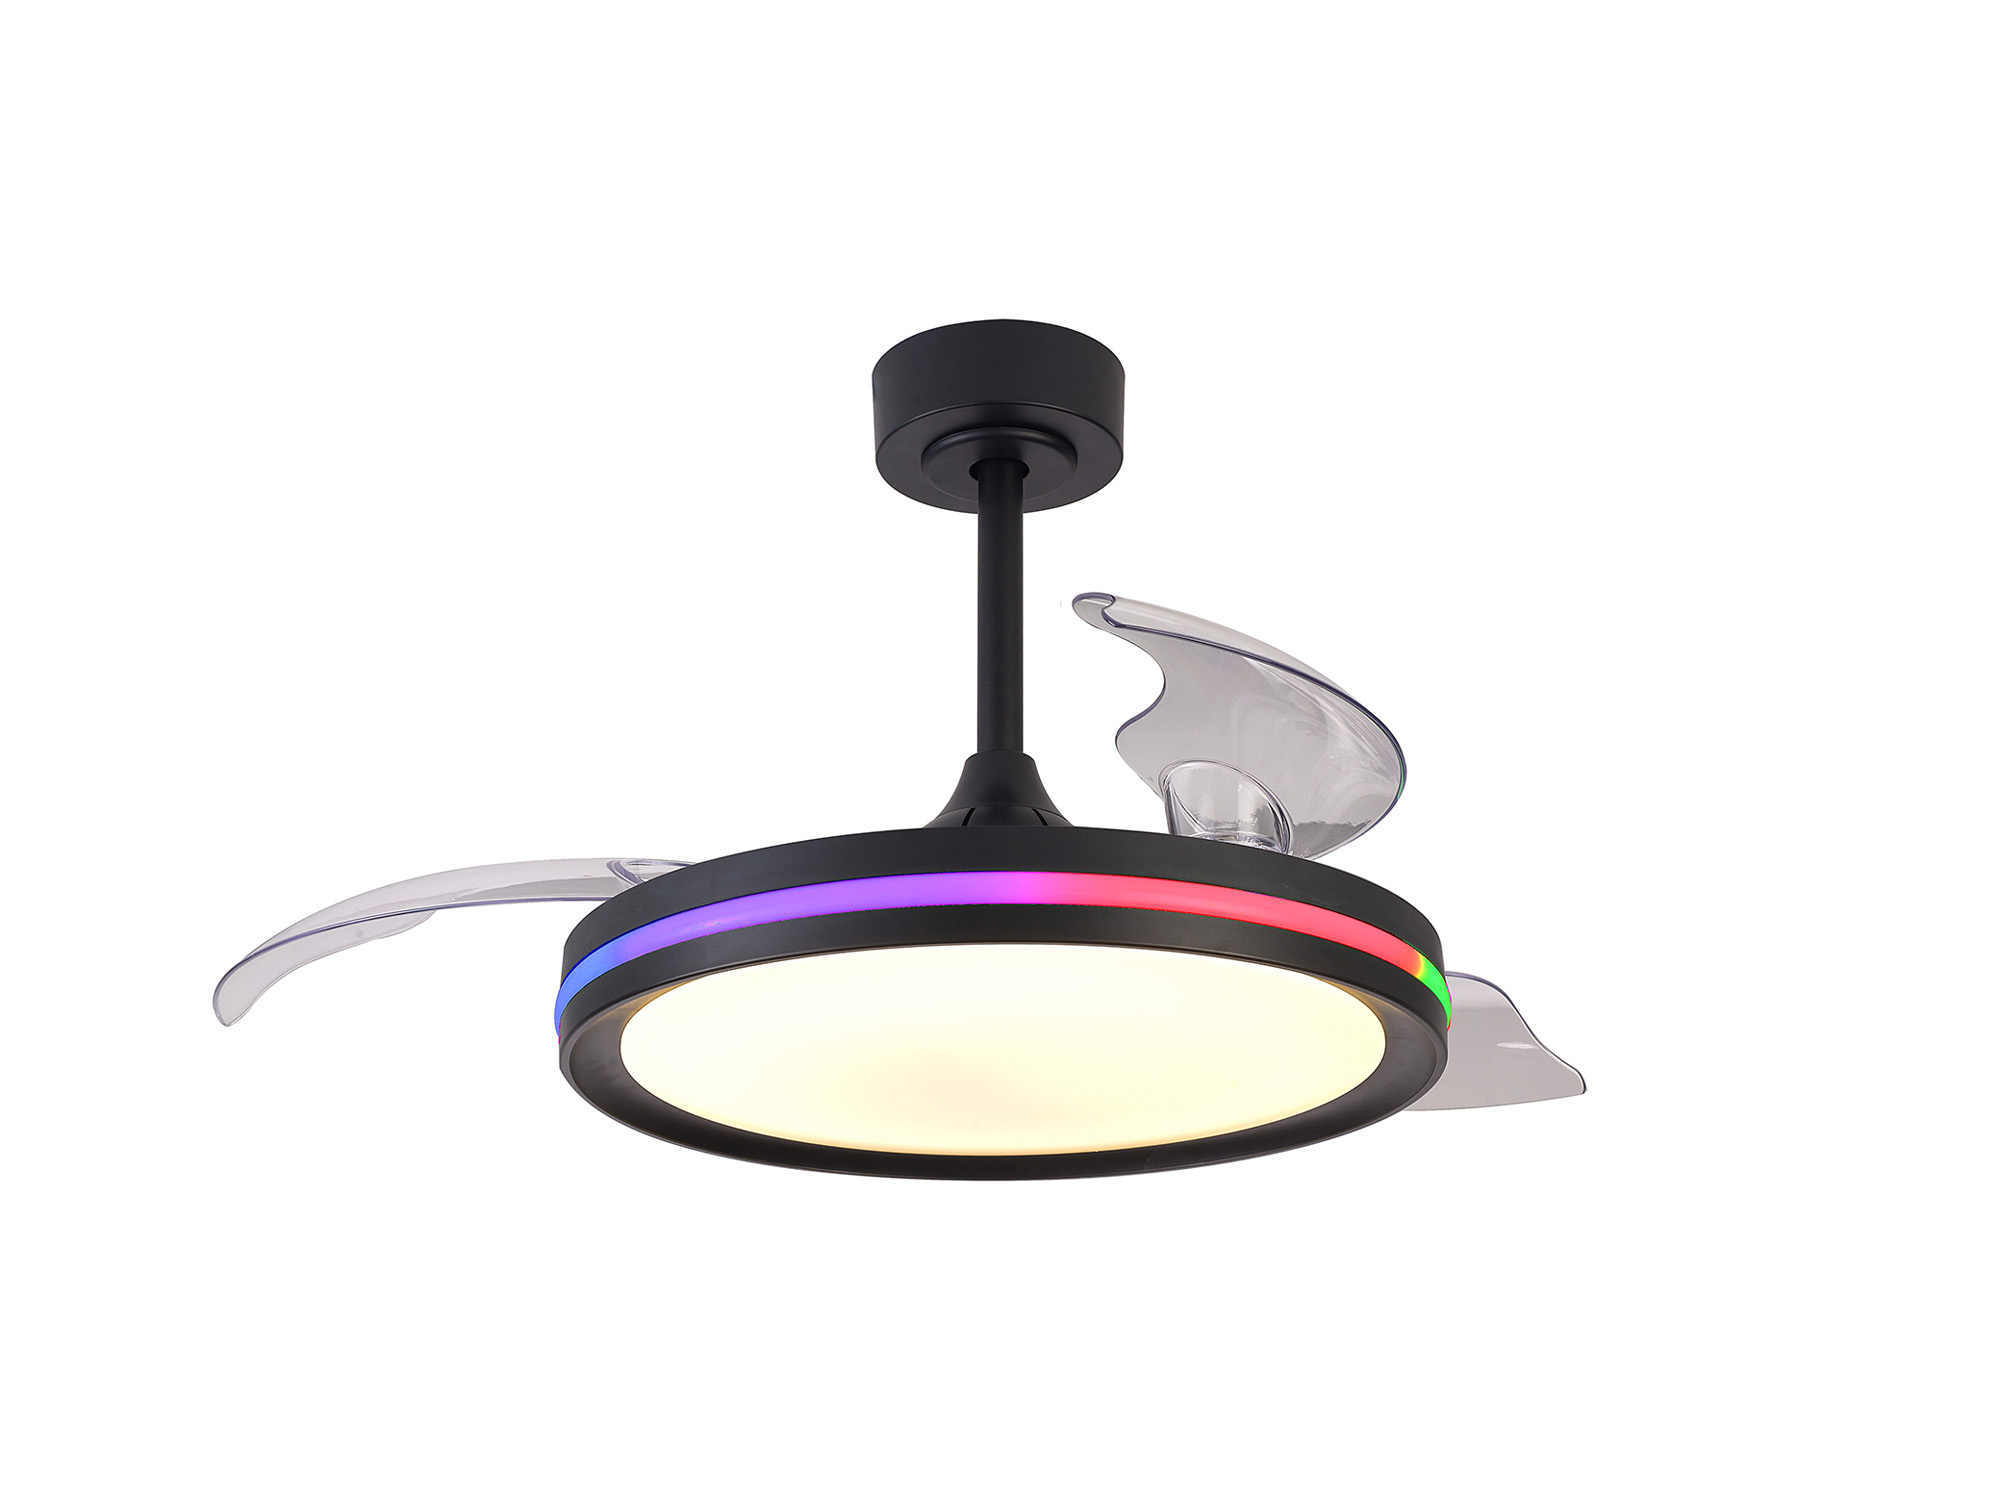 M8728  Rafaga 50W LED Dimmable White/RGB Ceiling Light With Built-In 30W DC Reversible Fan; Remote Control 3000-6500K; Black